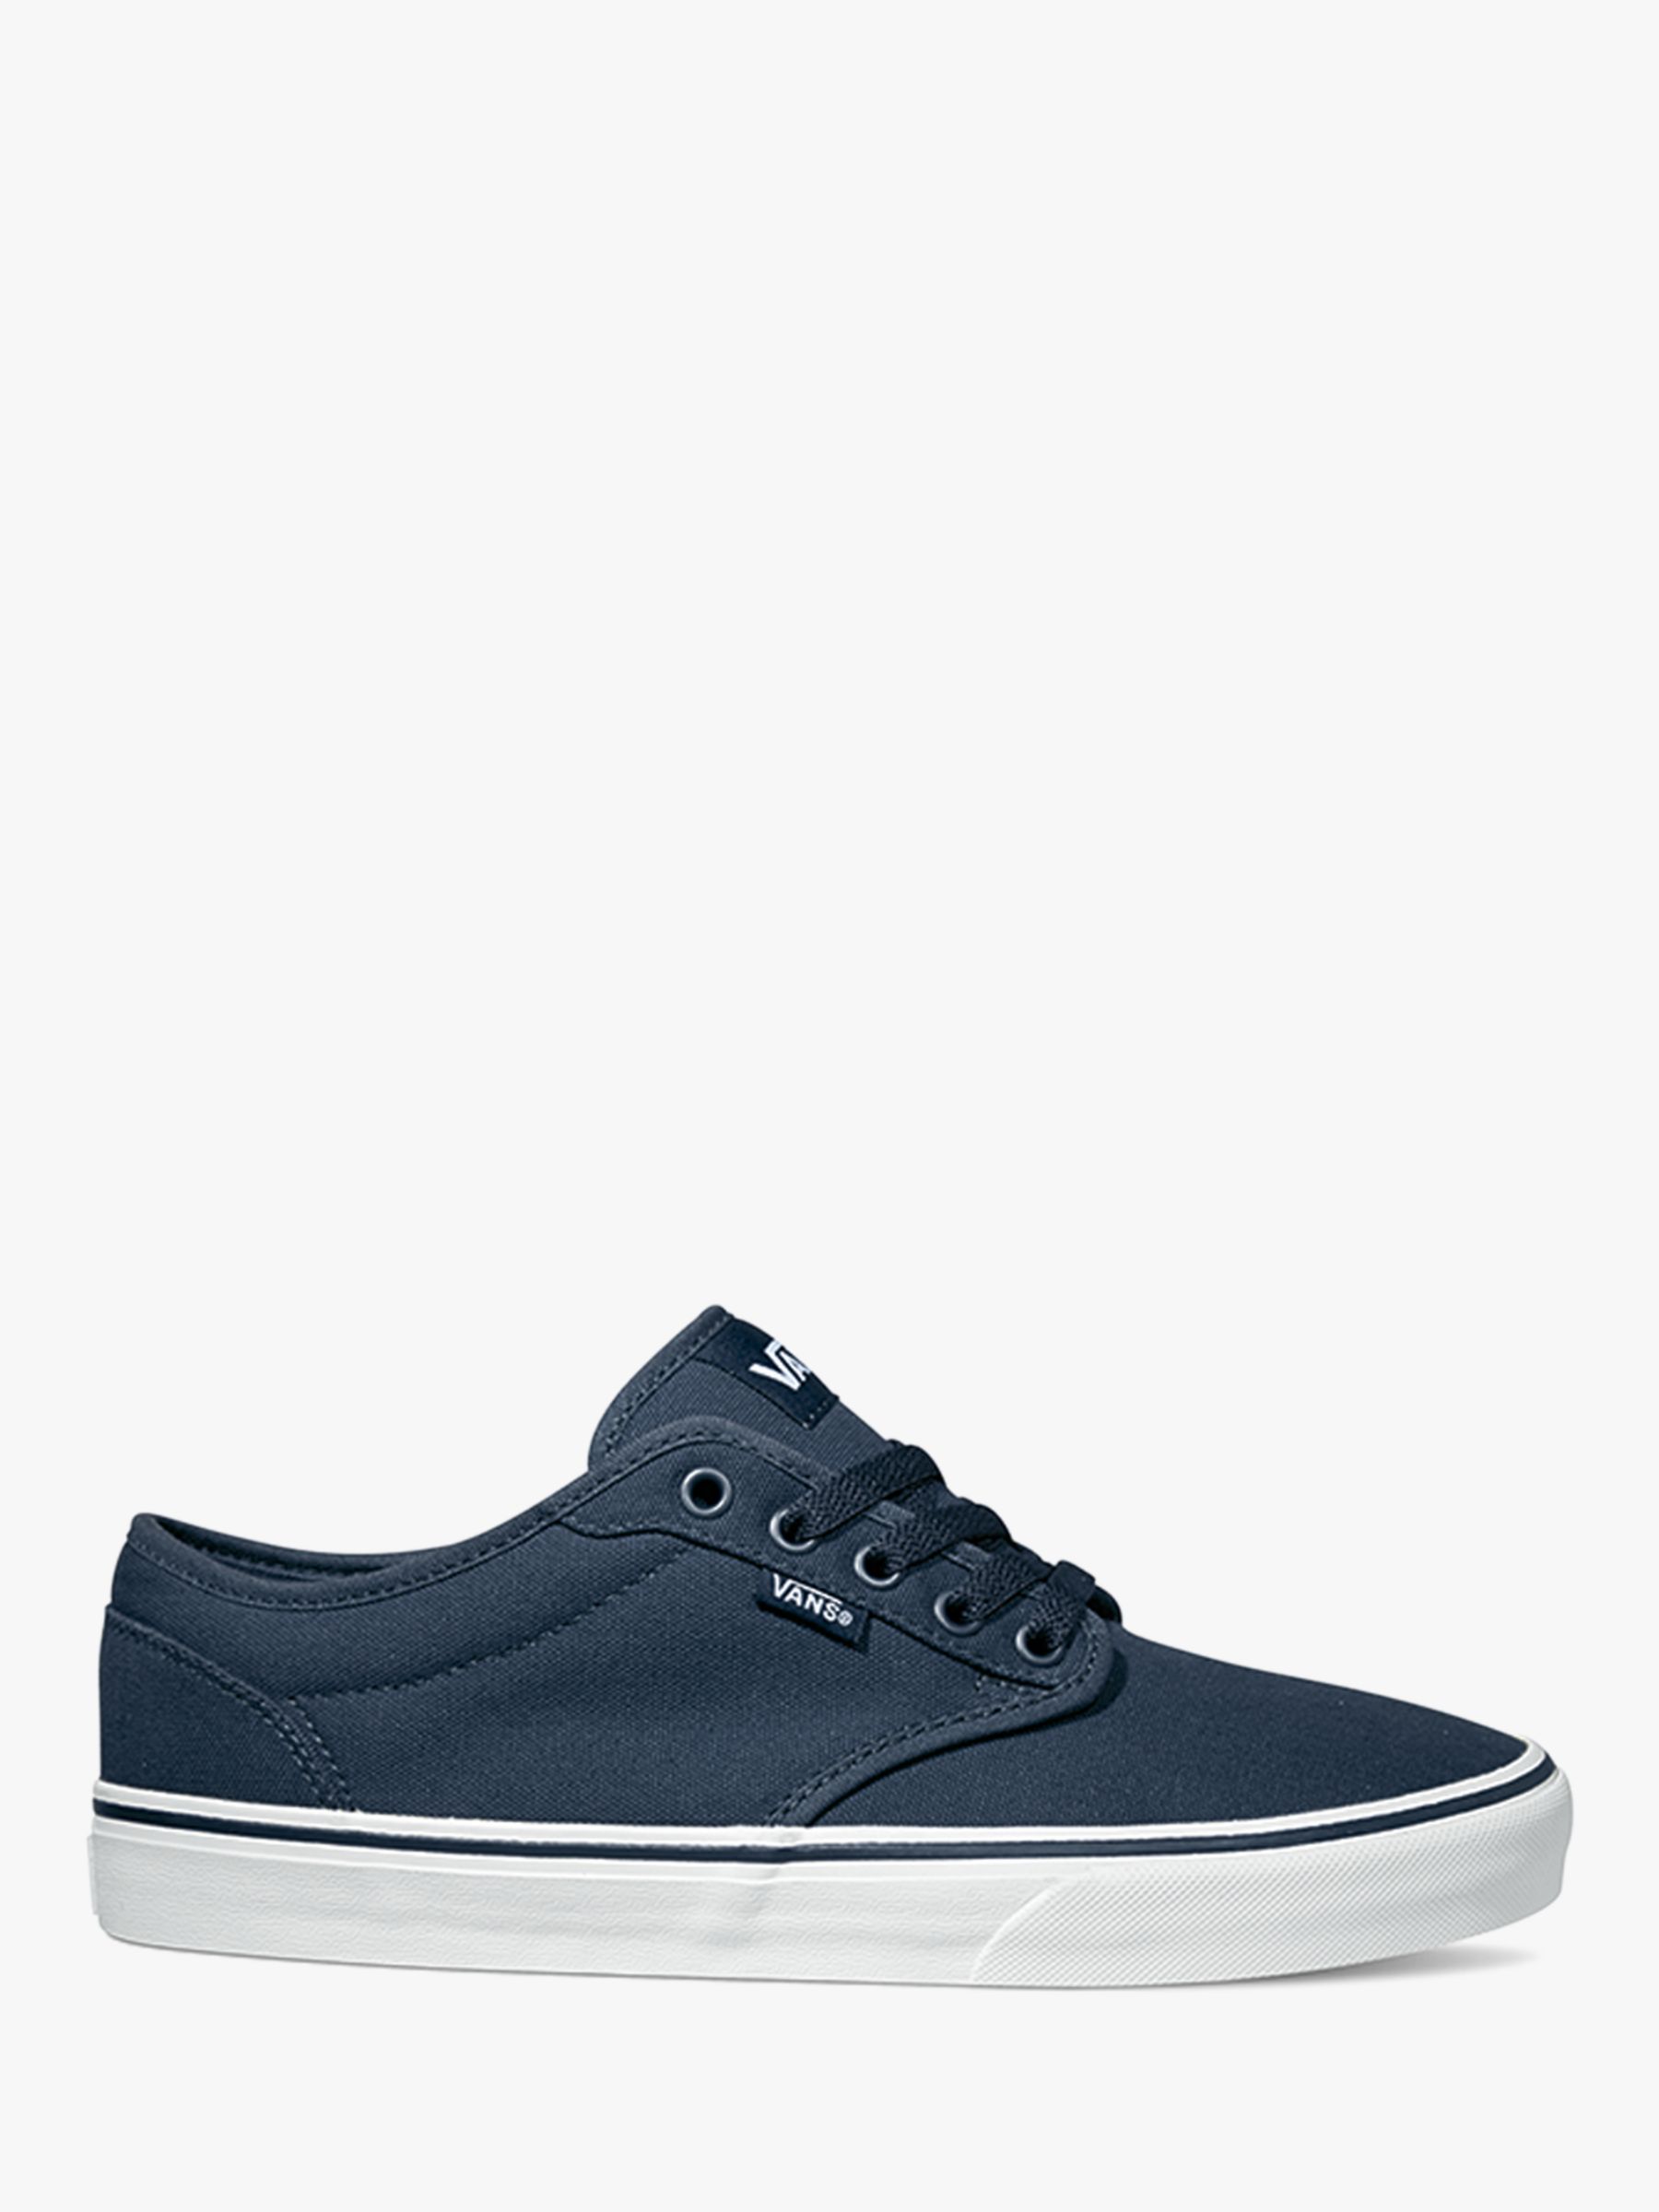 vans atwood canvas trainers